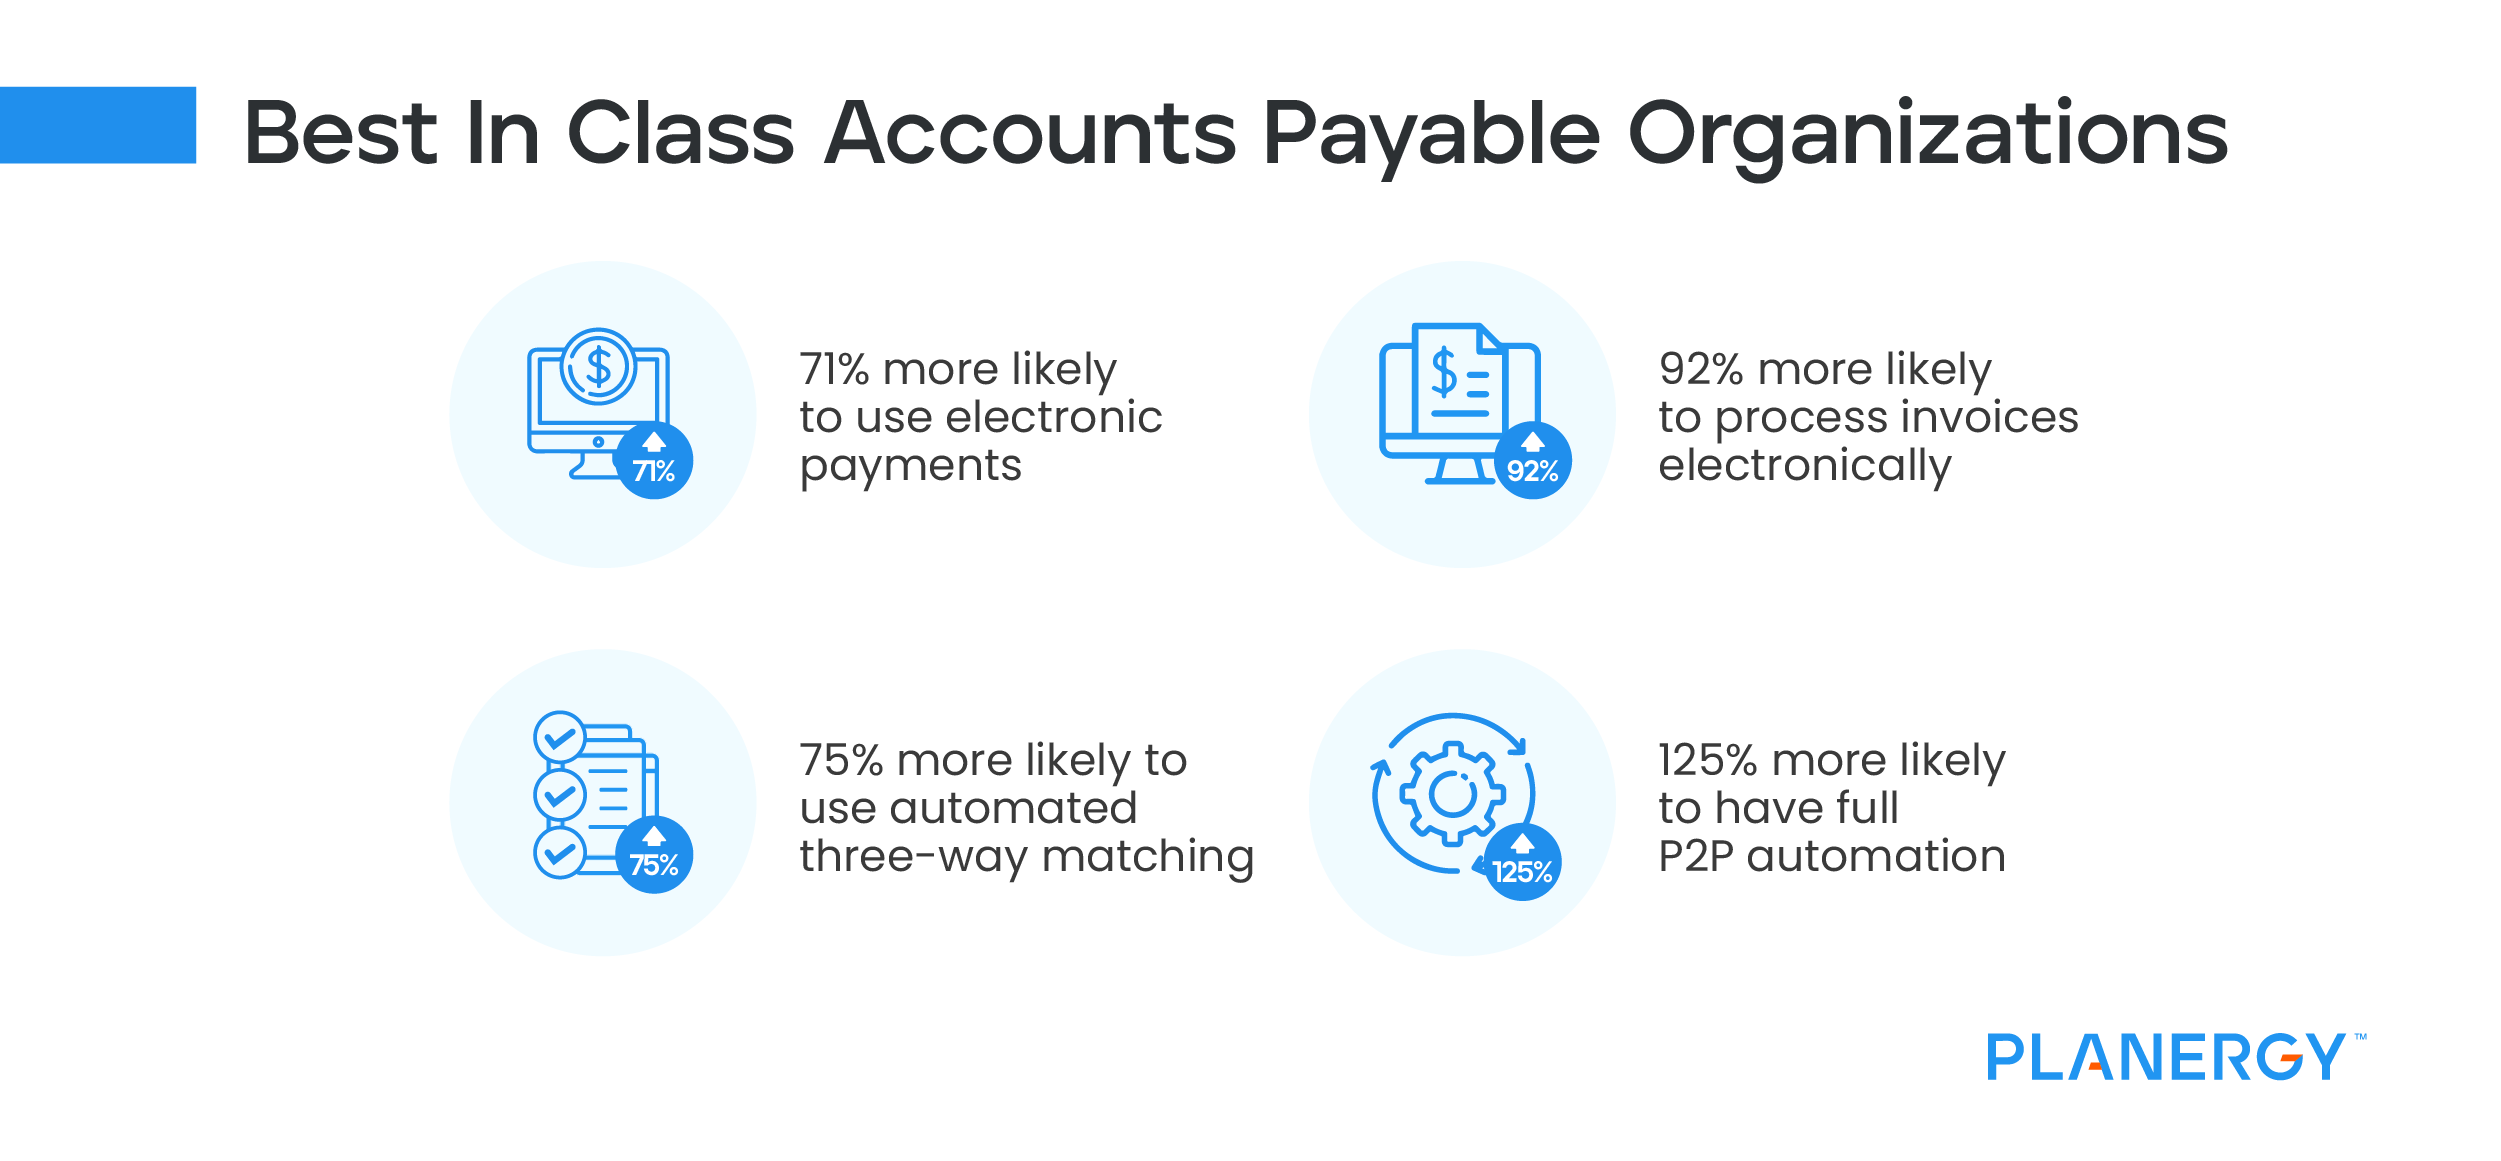 Best in Class Accounts Payable Organizations